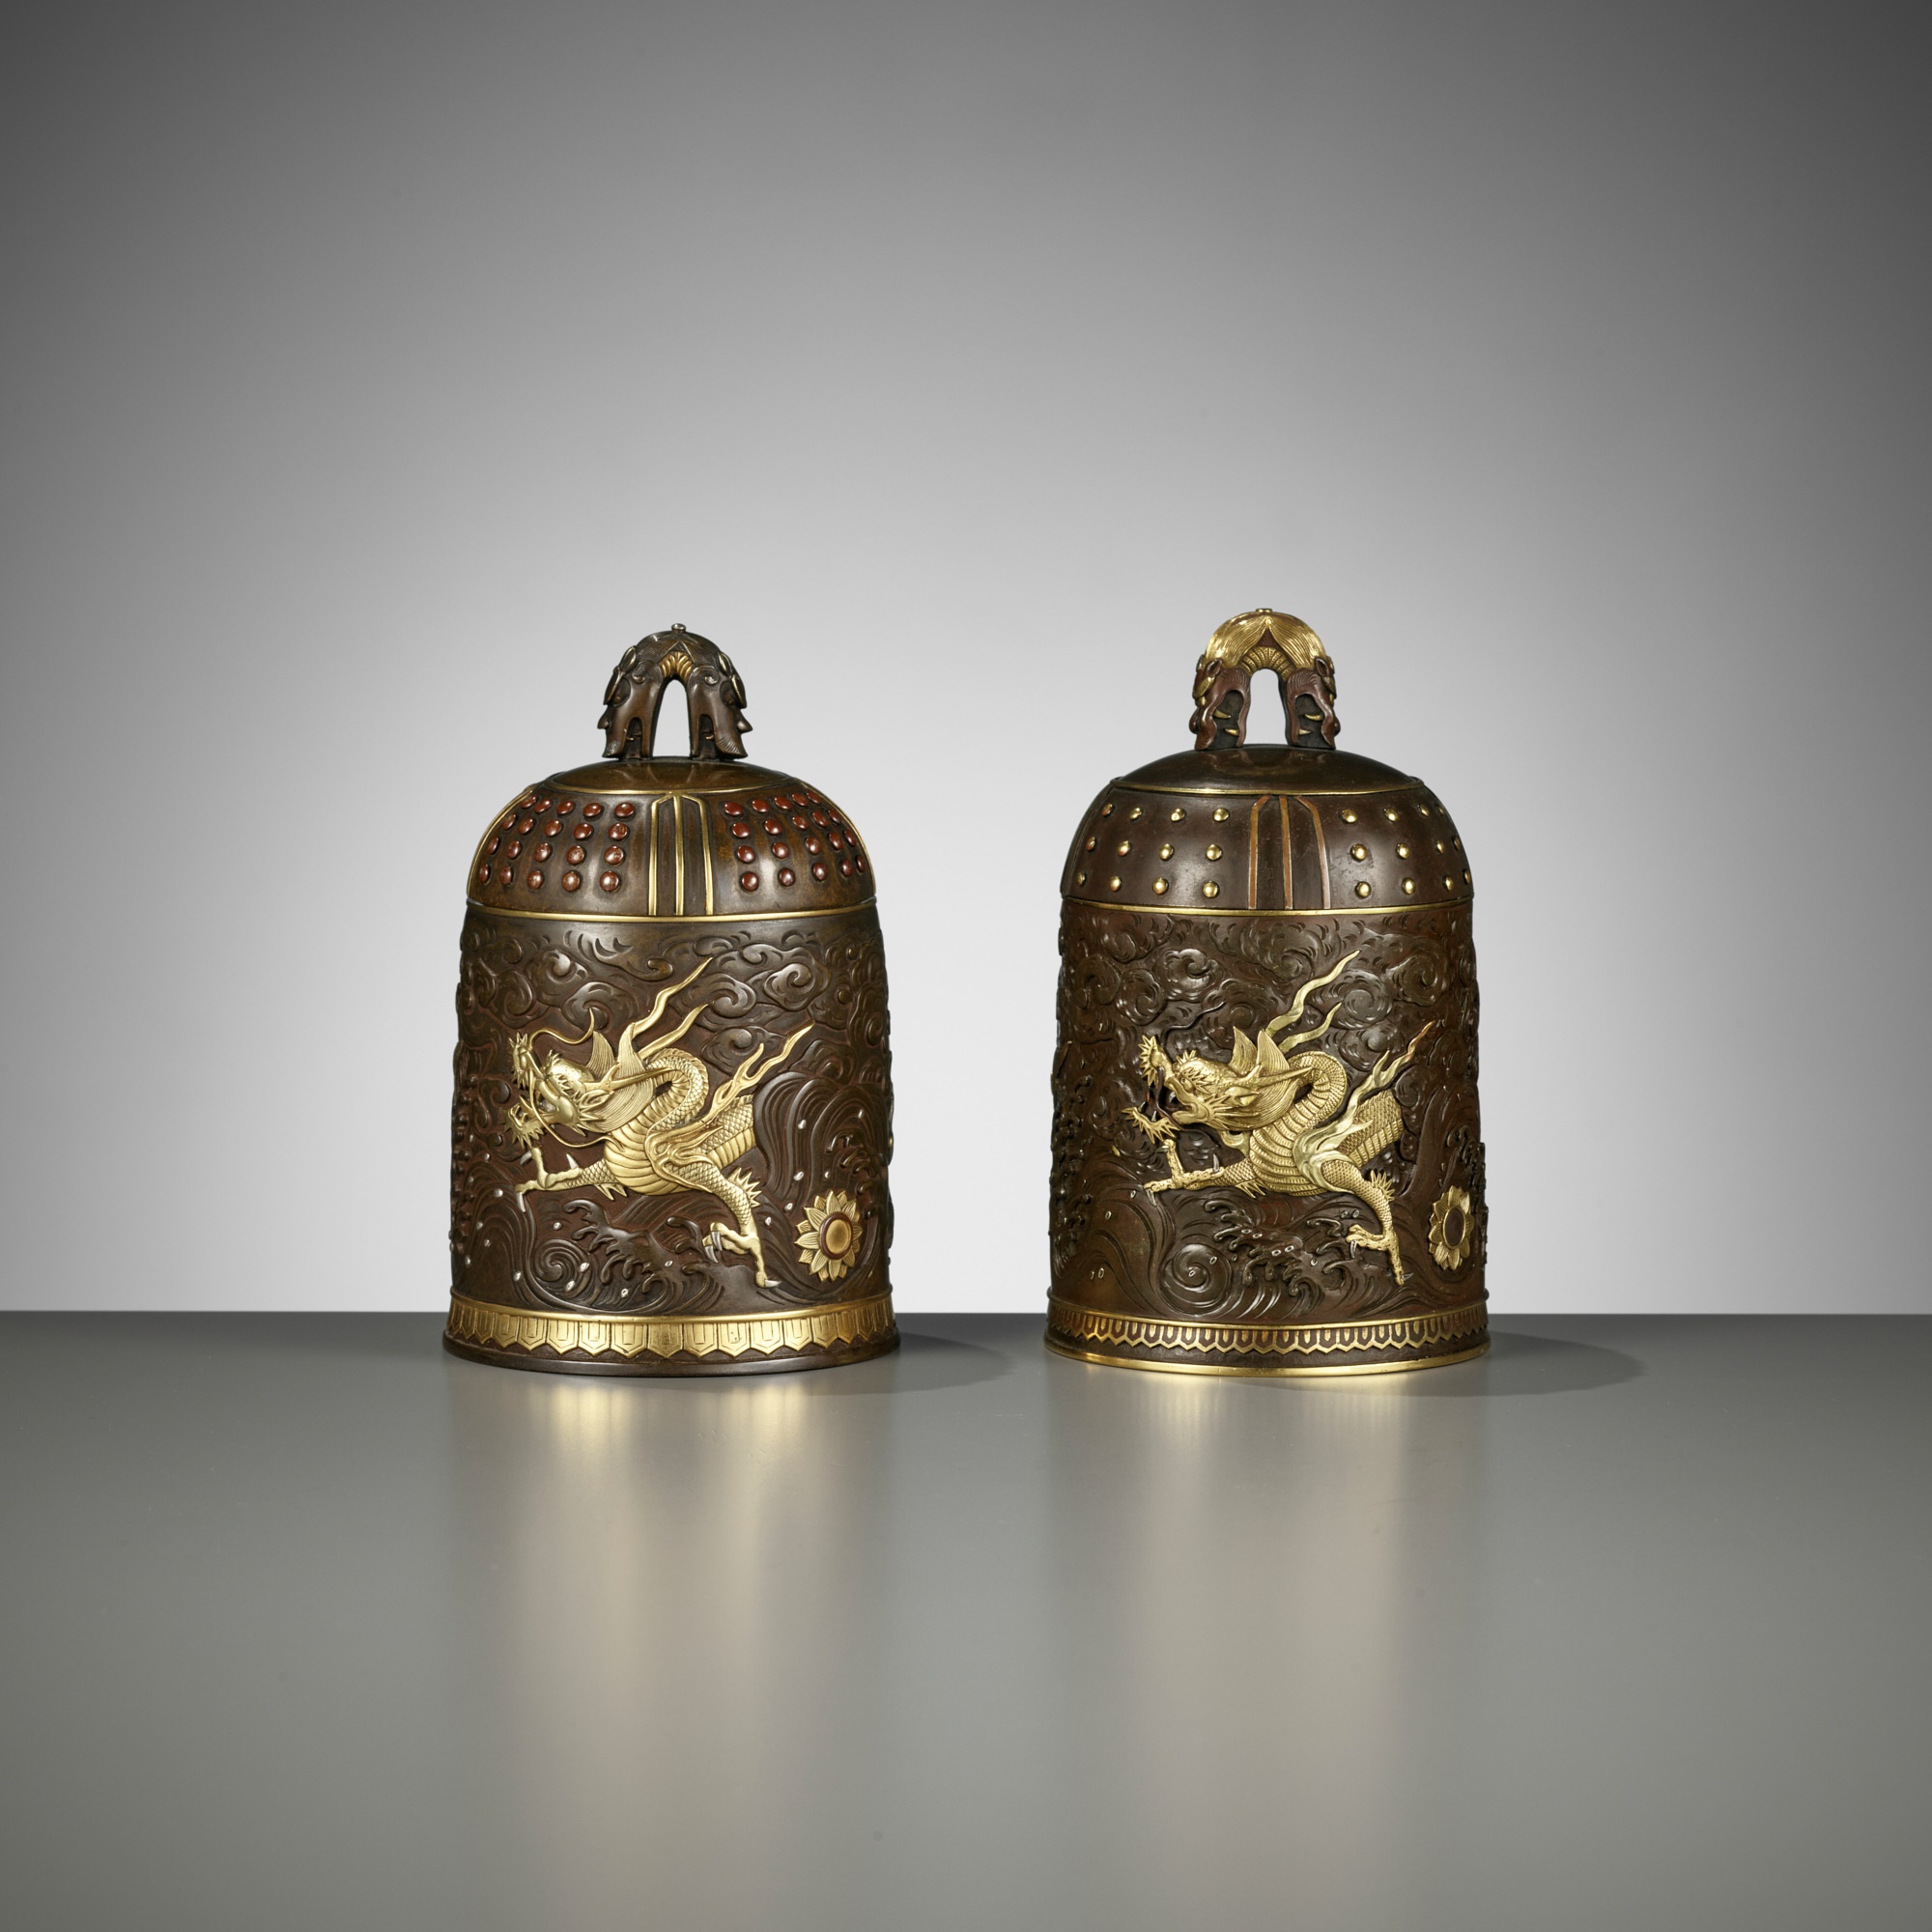 A MATCHED PAIR OF GOLD-INLAID BRONZE 'BUDDHIST TEMPLE BELL' KOGO, ONE BY MIYABE ATSUYOSHI